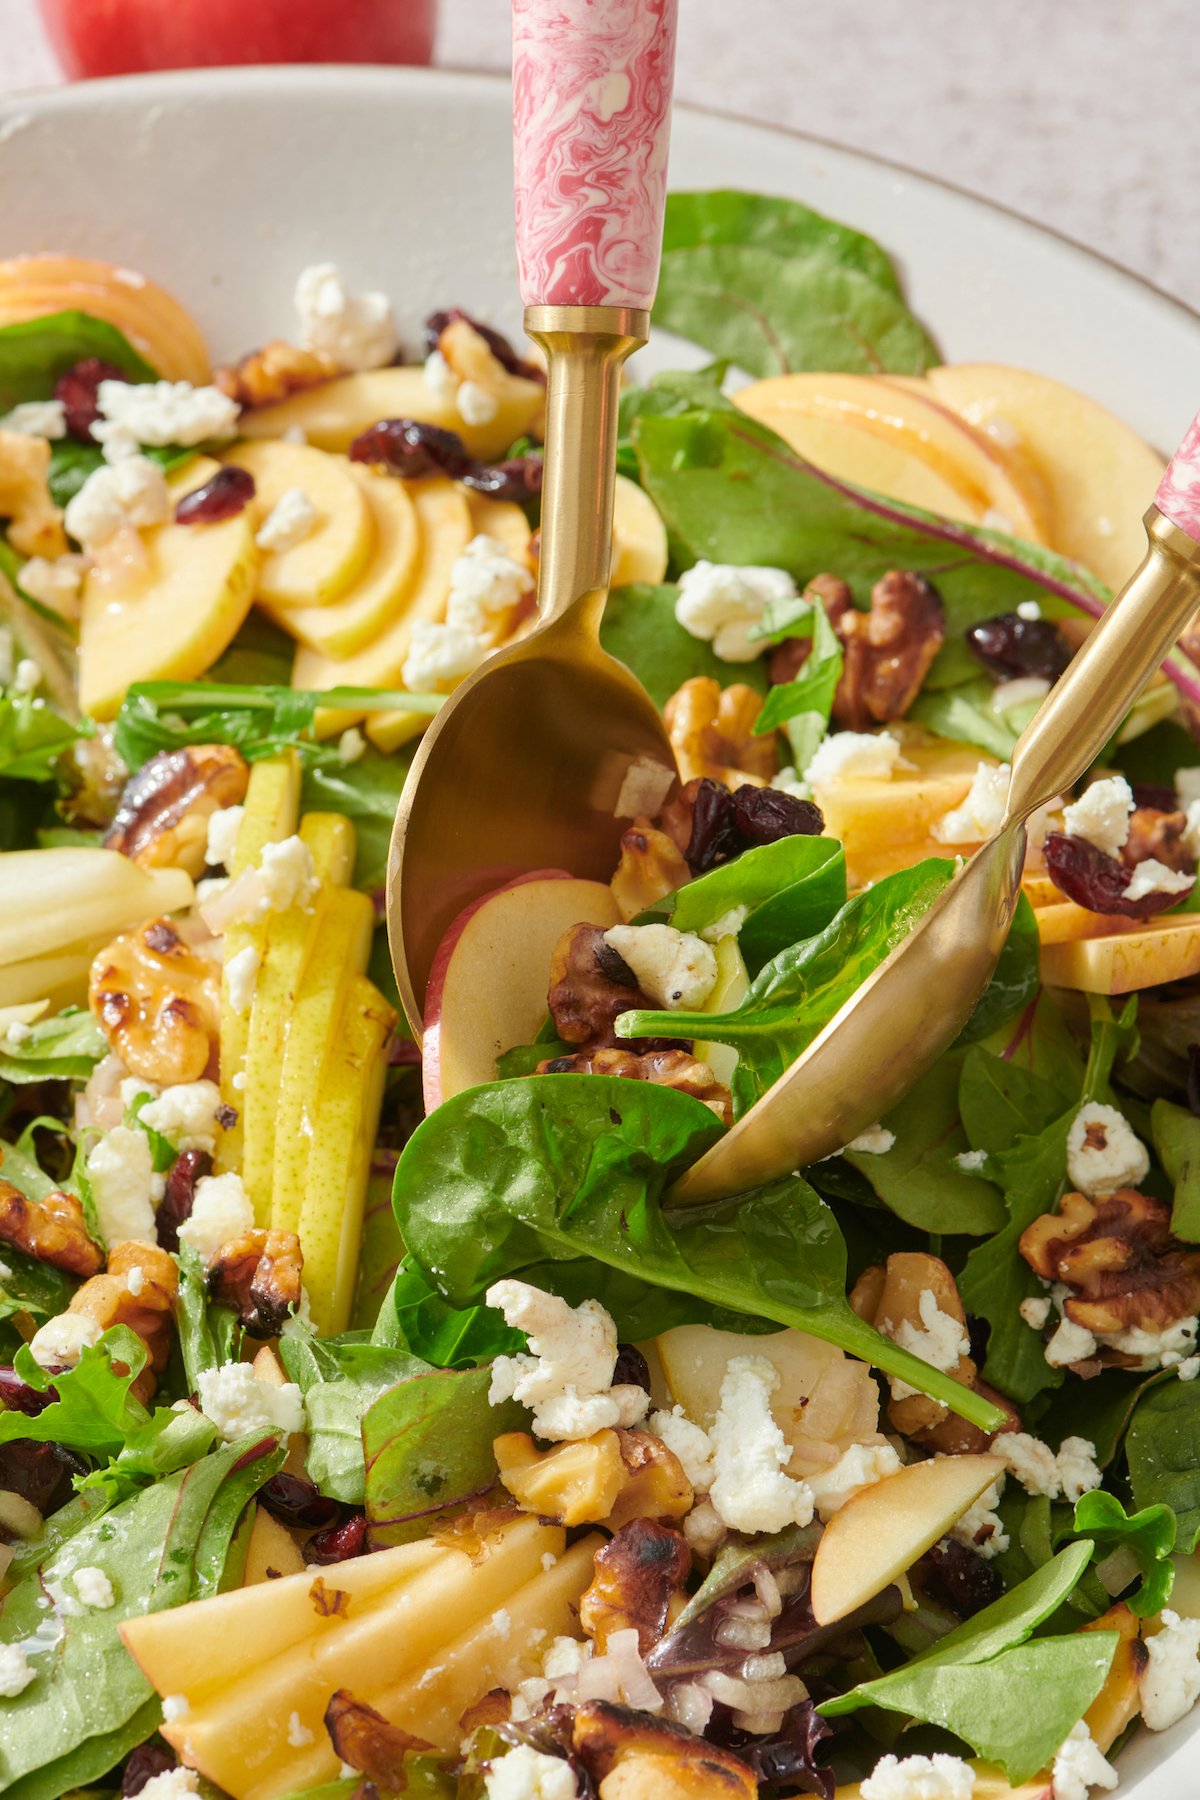 Serving Fall Salad with Apples, Pears and Goat Cheese.